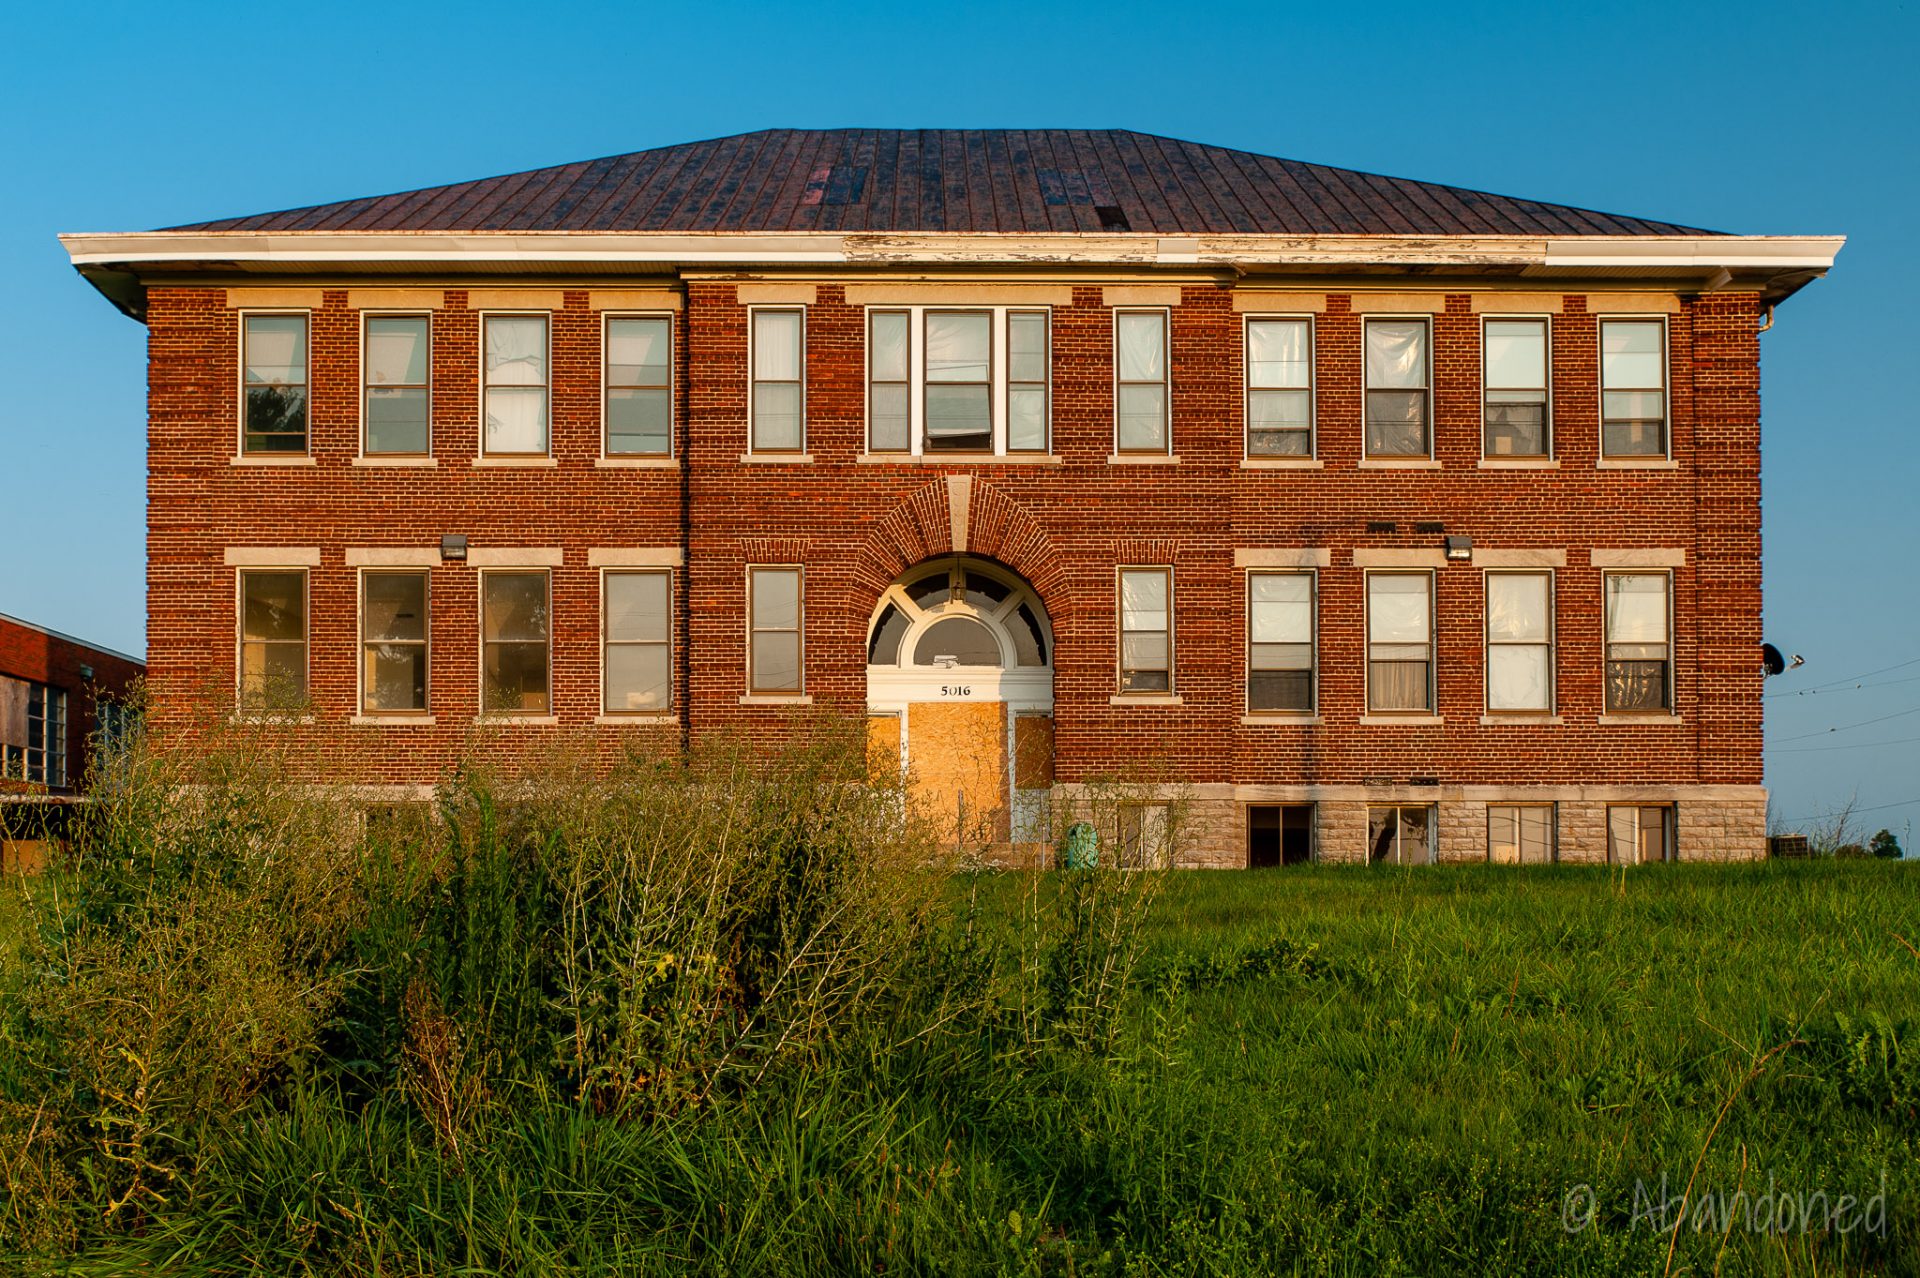 Mays Lick Consolidated School